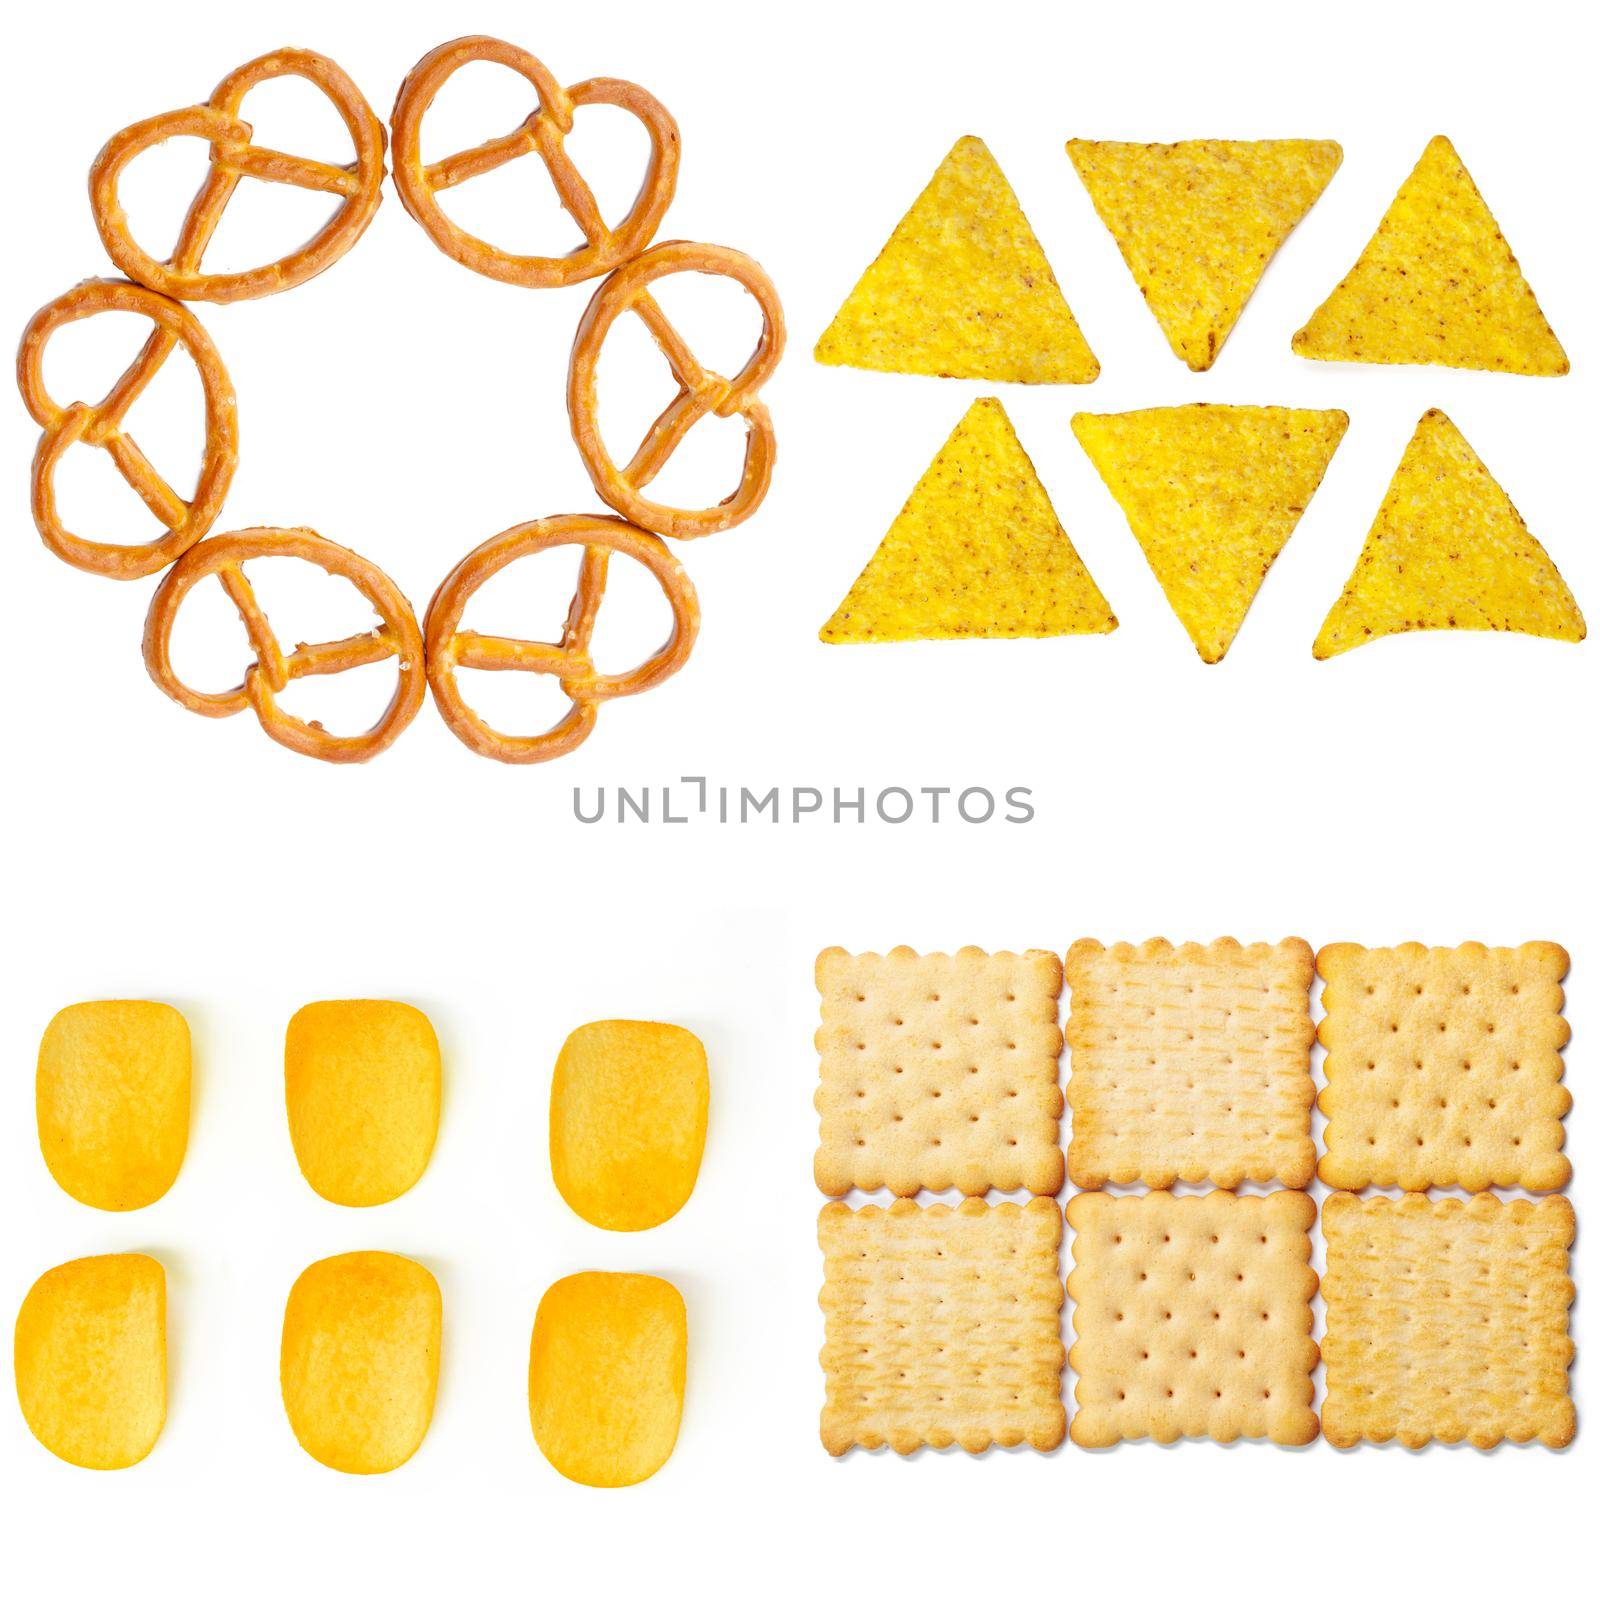 Salty snacks. Pretzels, chips, crackers collage by Fabrikasimf